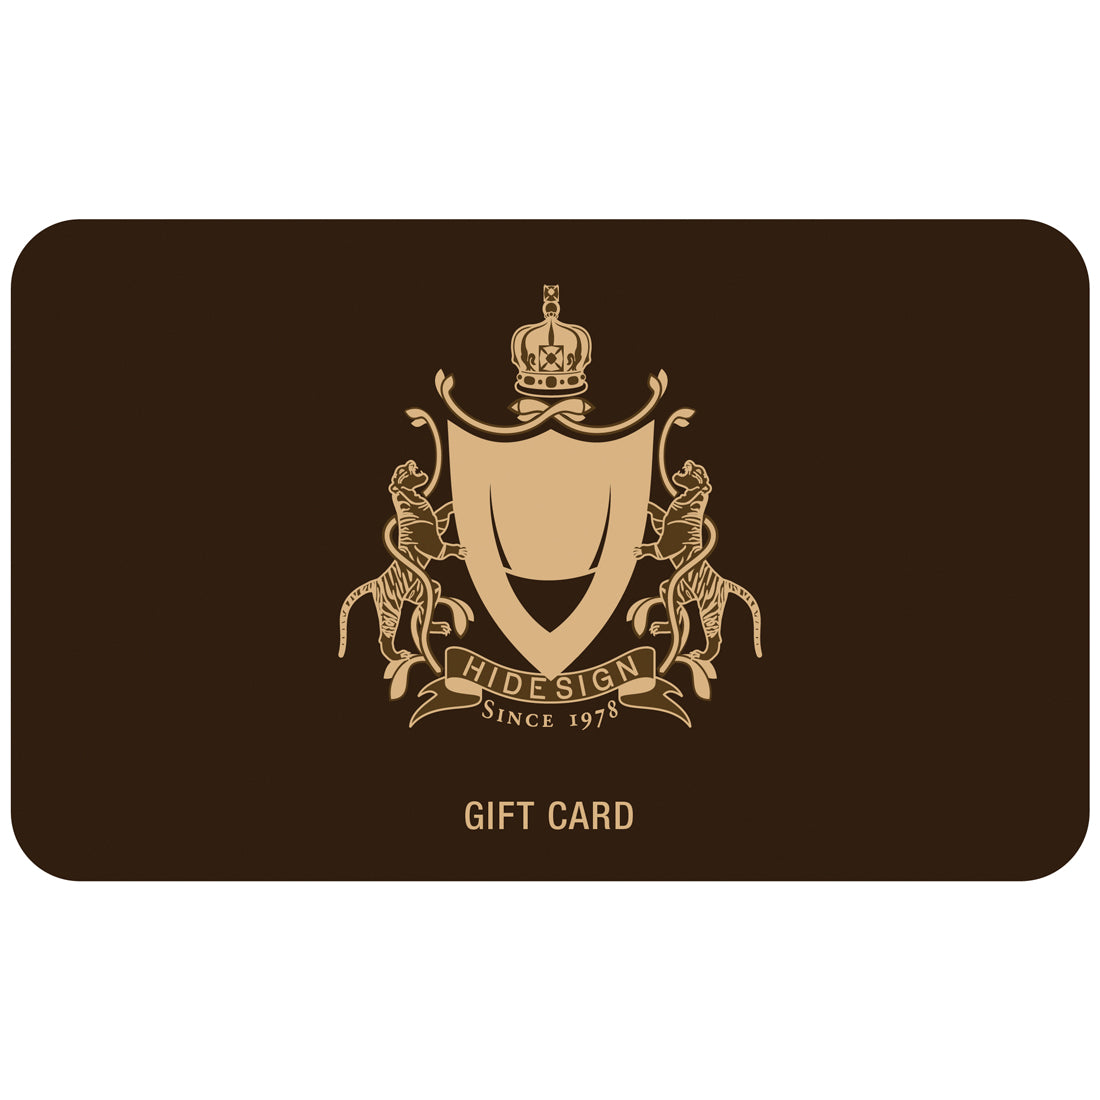 Gift Cards and EVouchers for every Occasion  nth Rewards